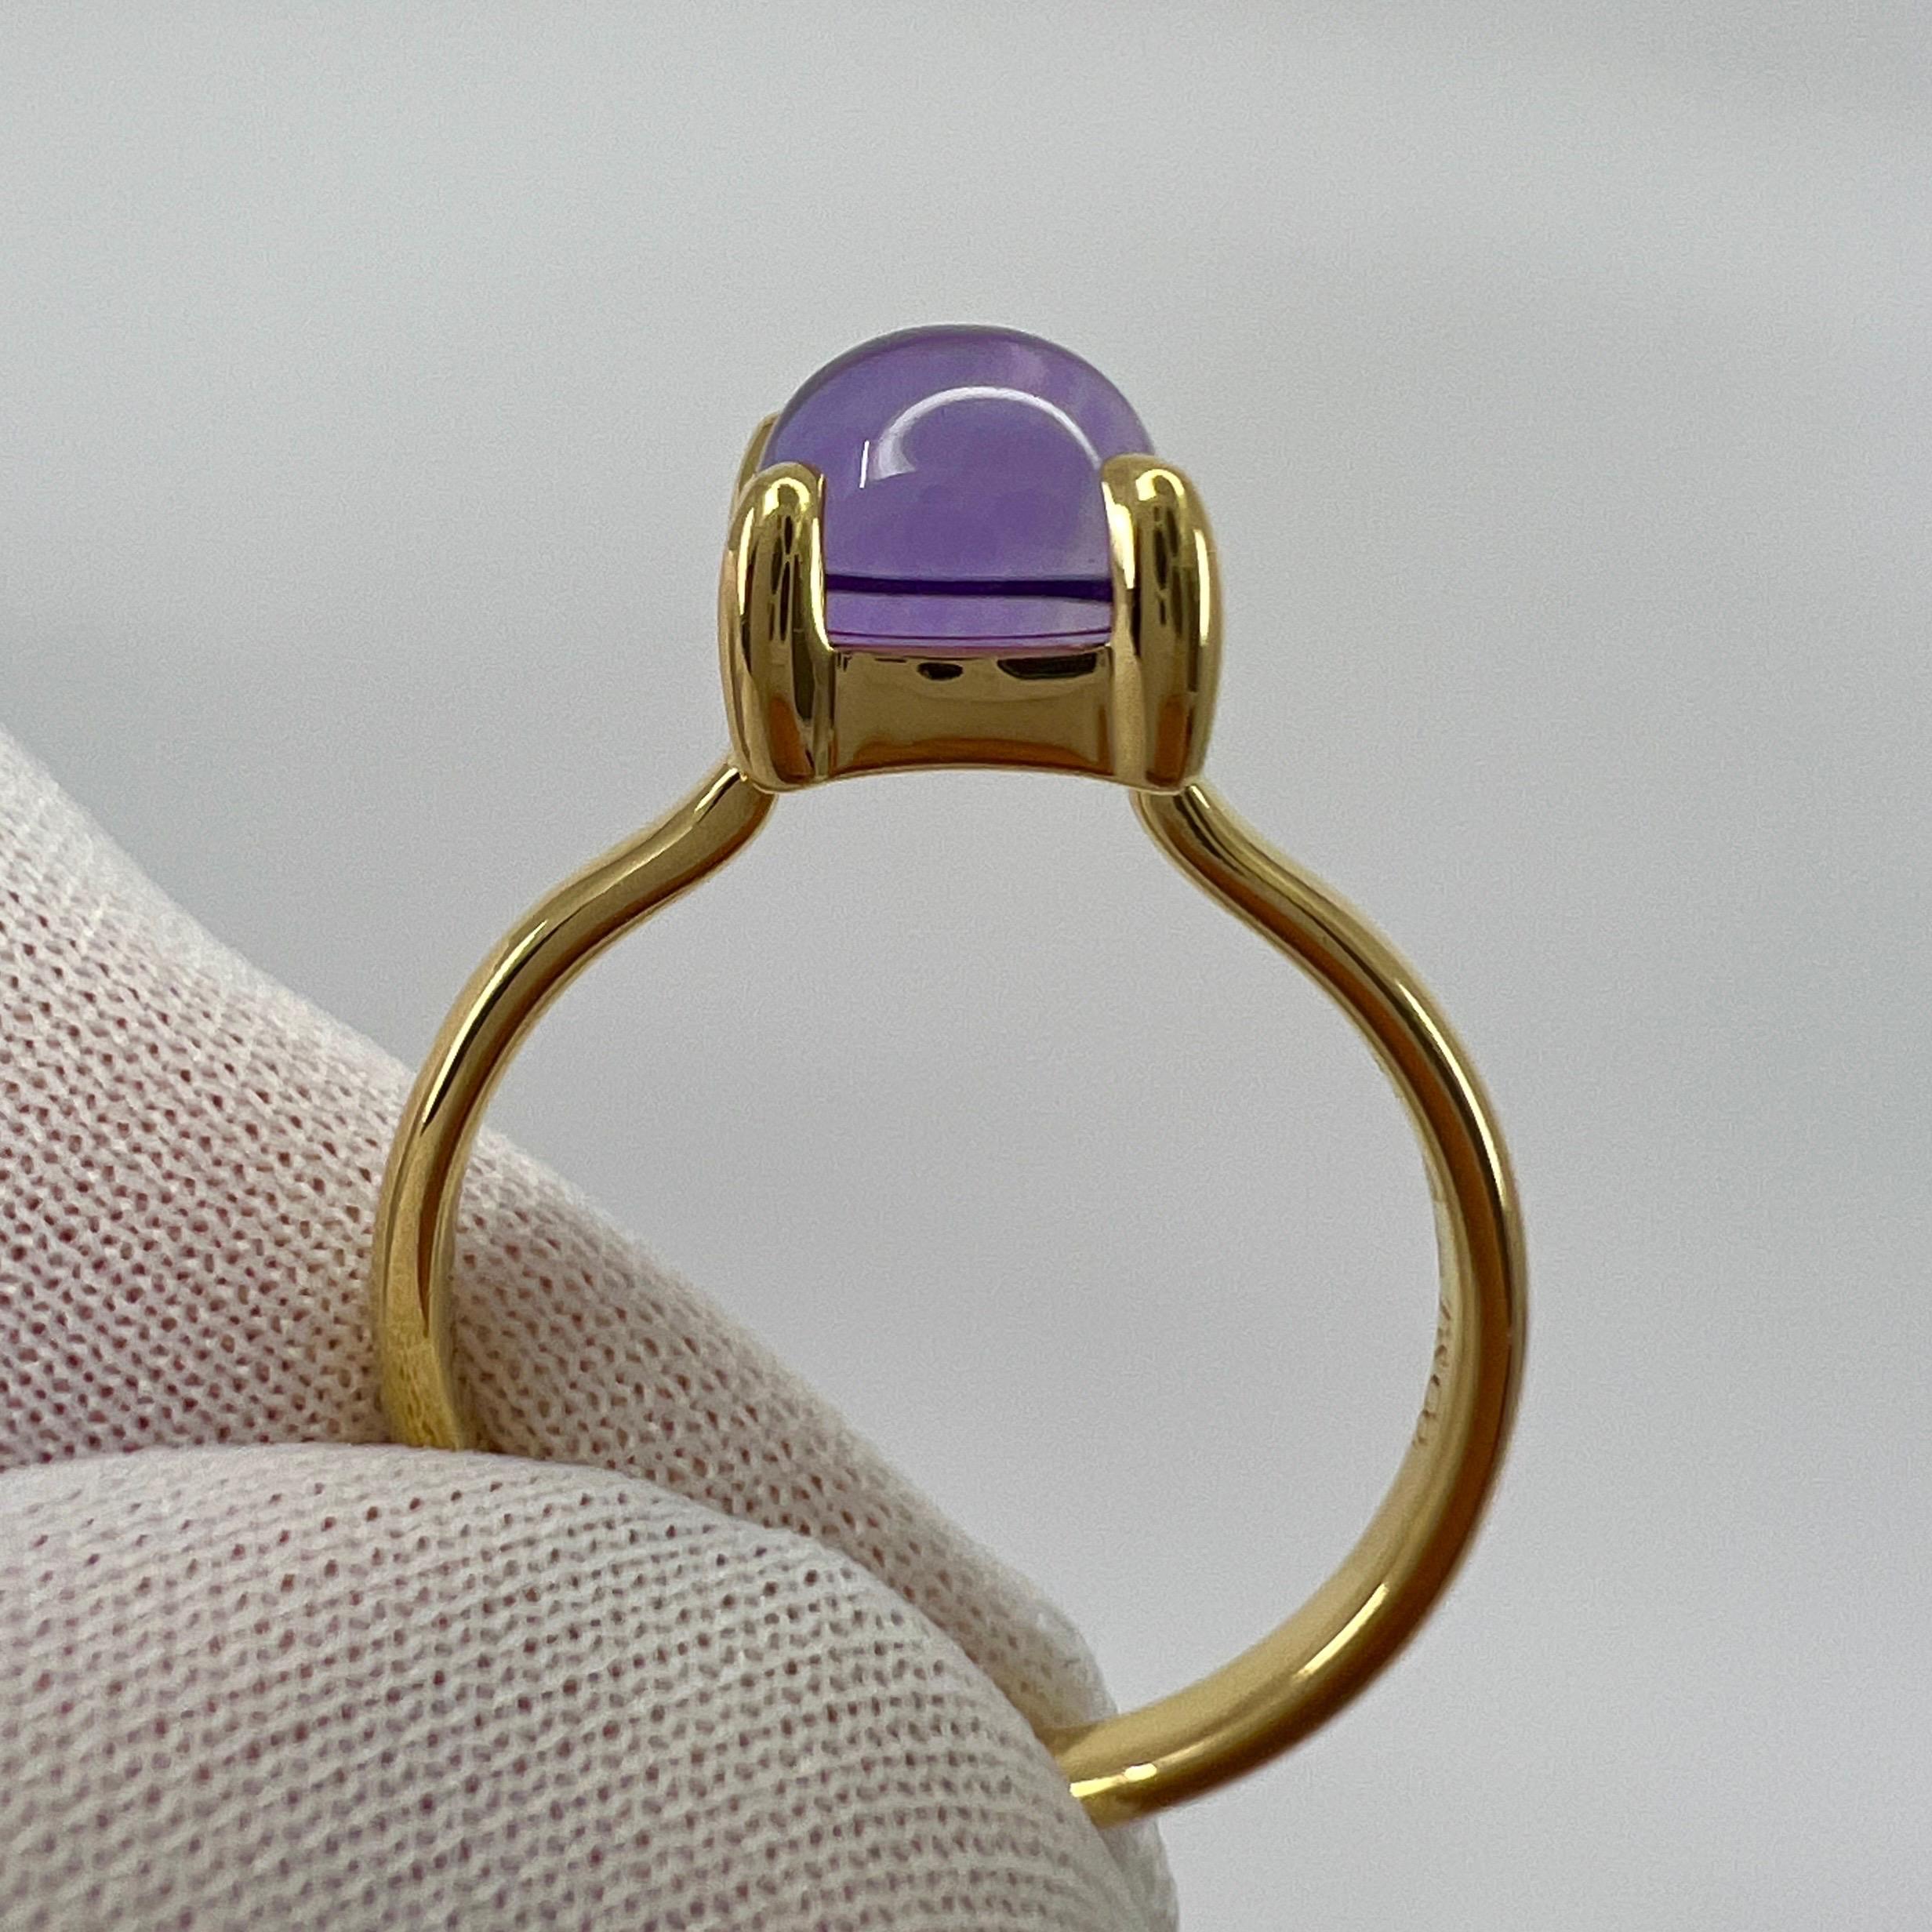 Rare Tiffany & Co. Paloma Picasso Amethyst Sugar Stack Loaf 18k Yellow Gold Ring For Sale 2